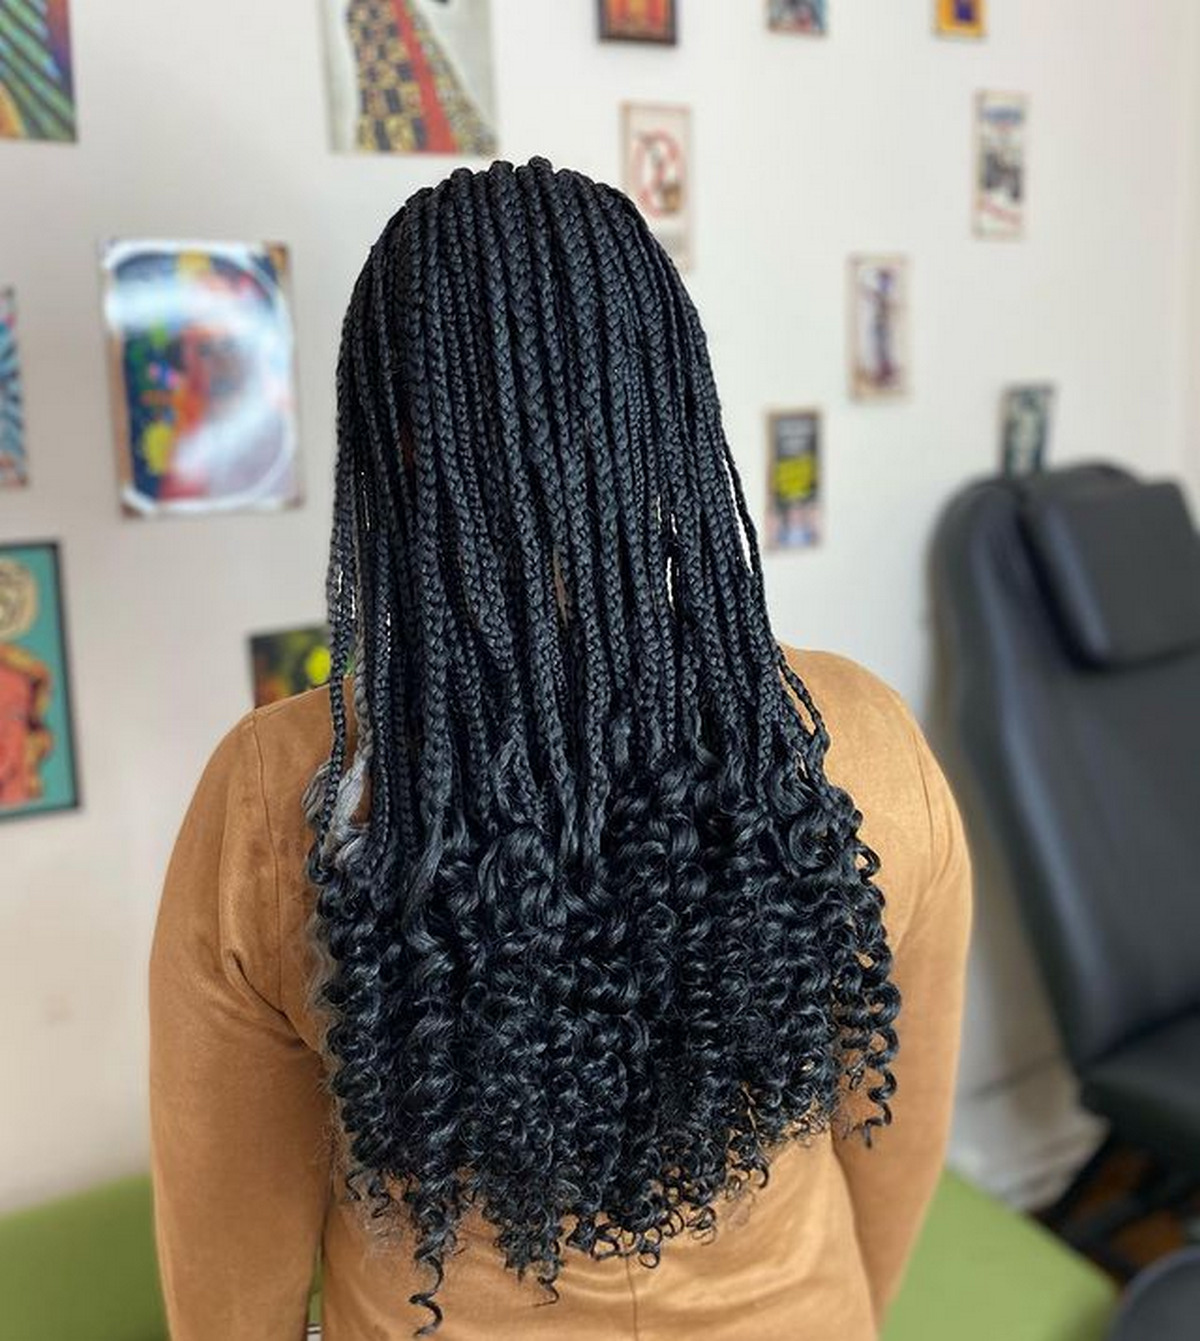 Shiny Dreadlock Hairstyle With A Ring Curl On Edge